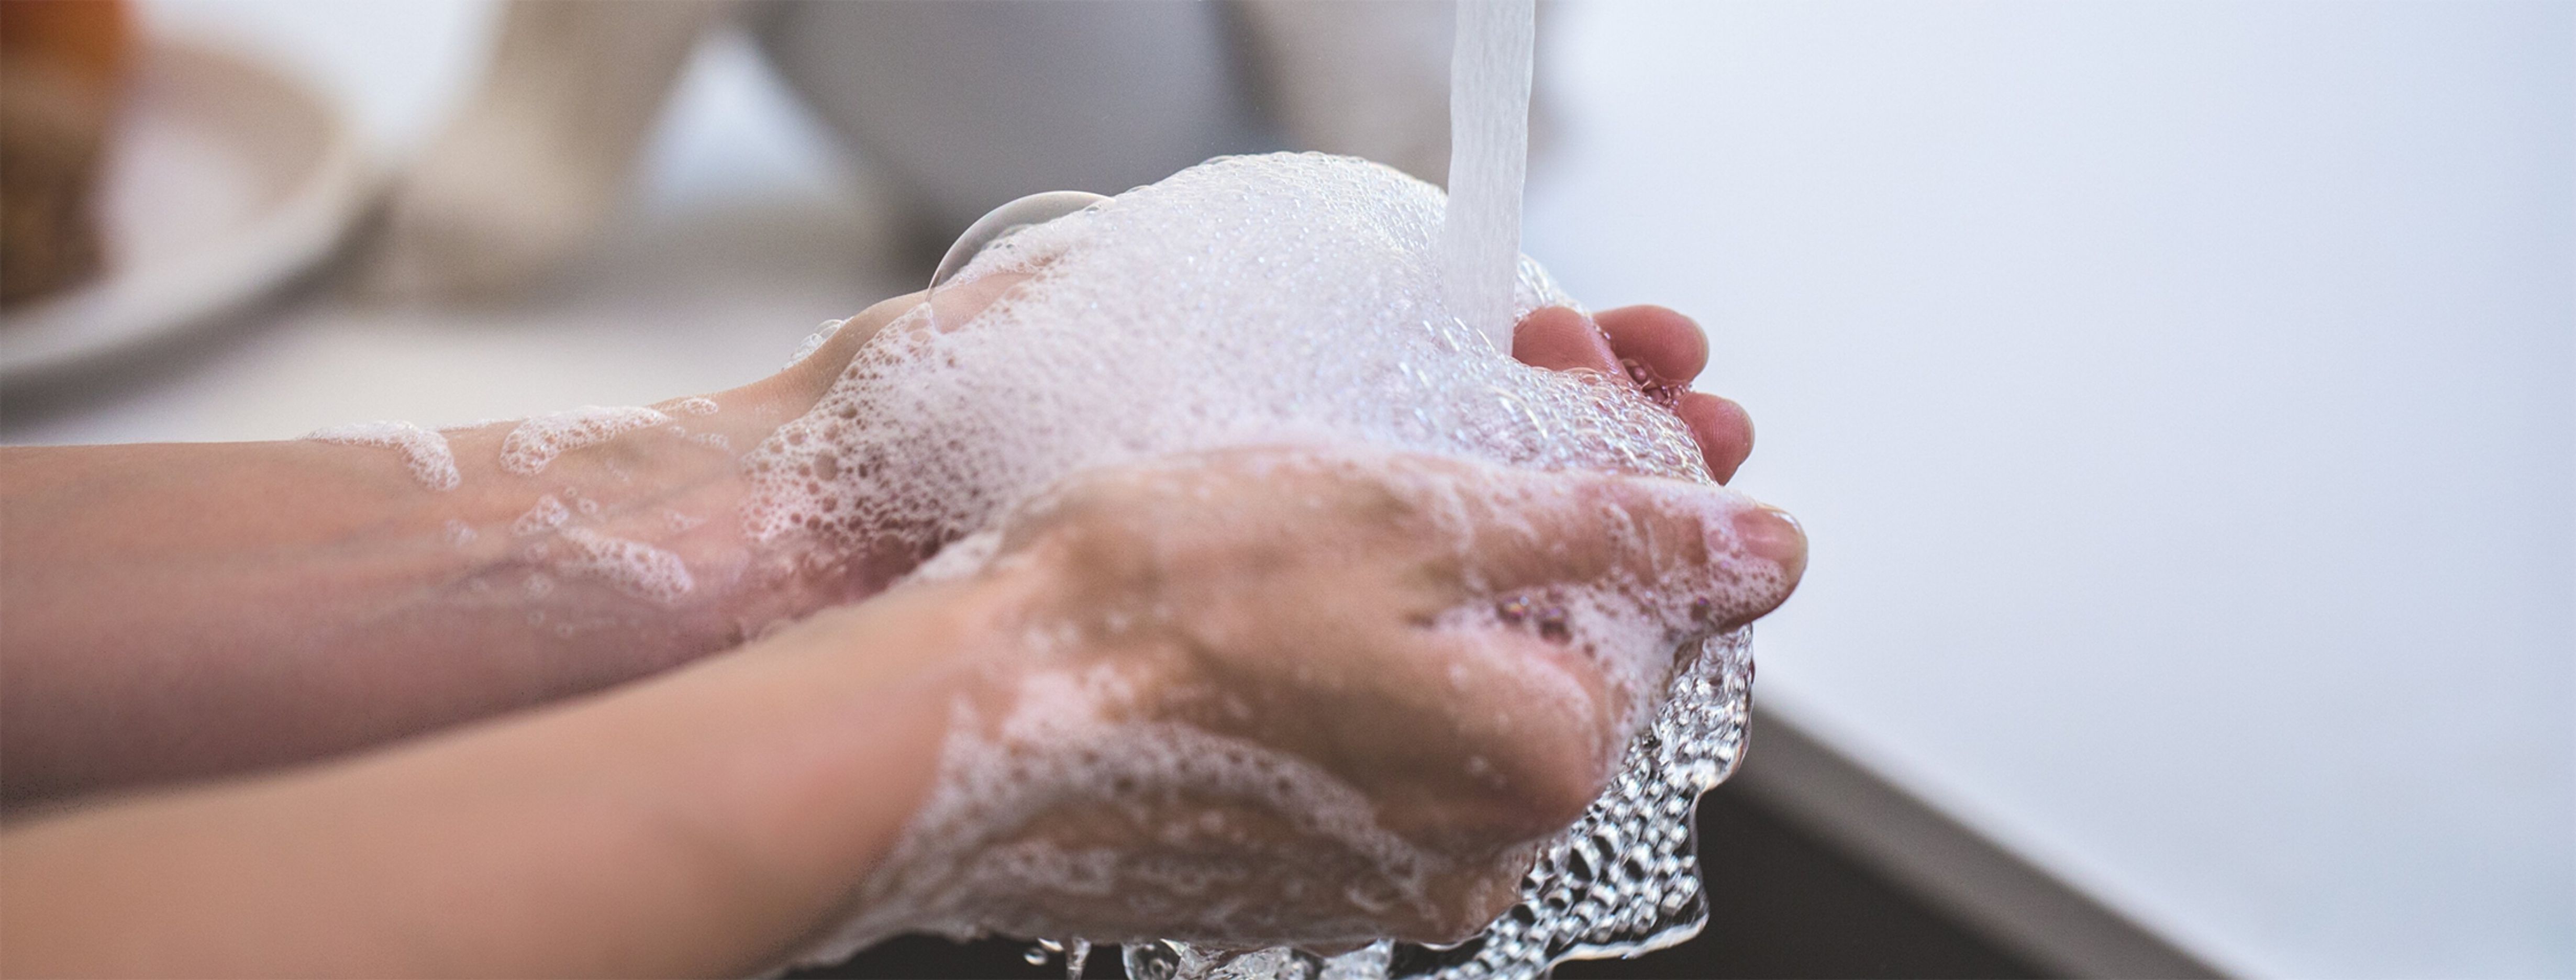 A pair of hands being washed with soap under a tap.